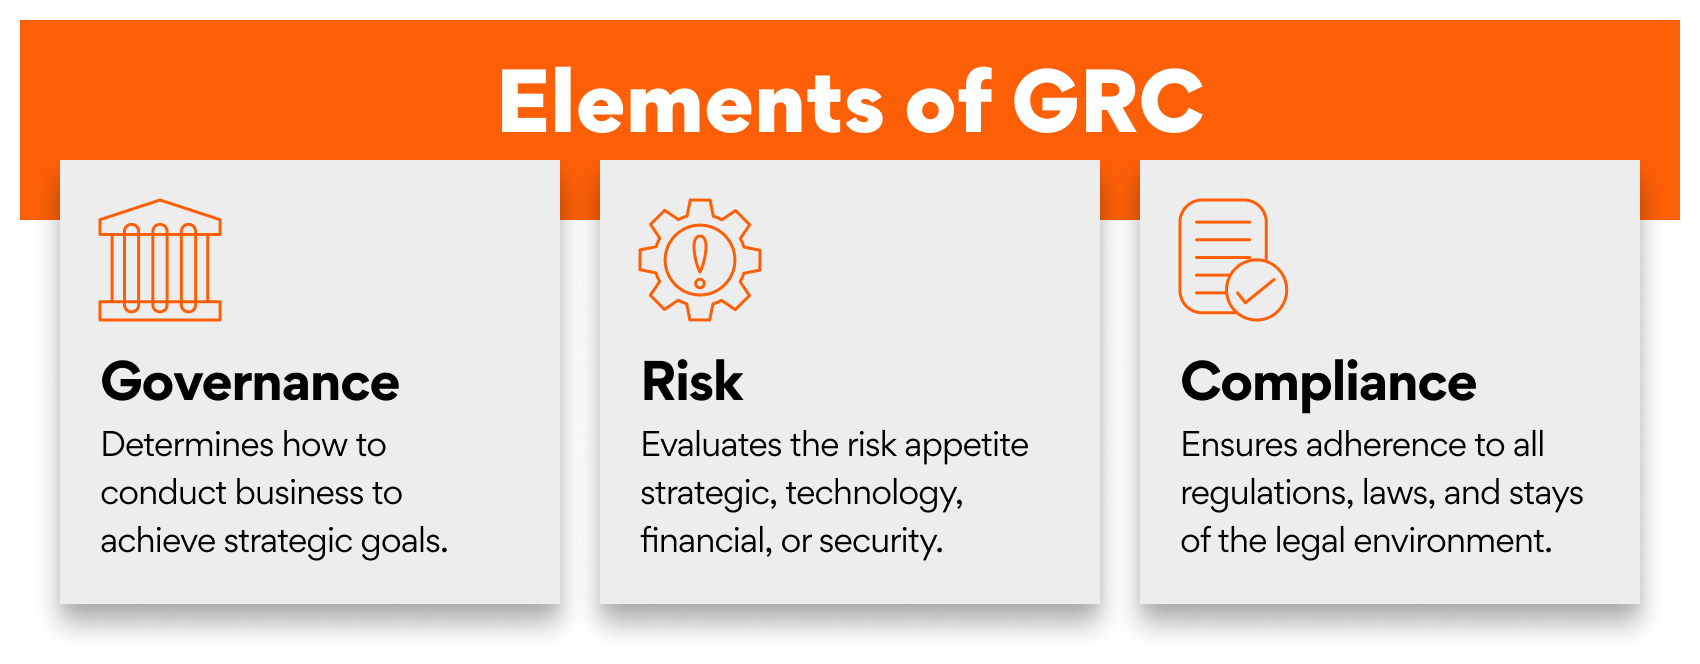 Elements of GRC